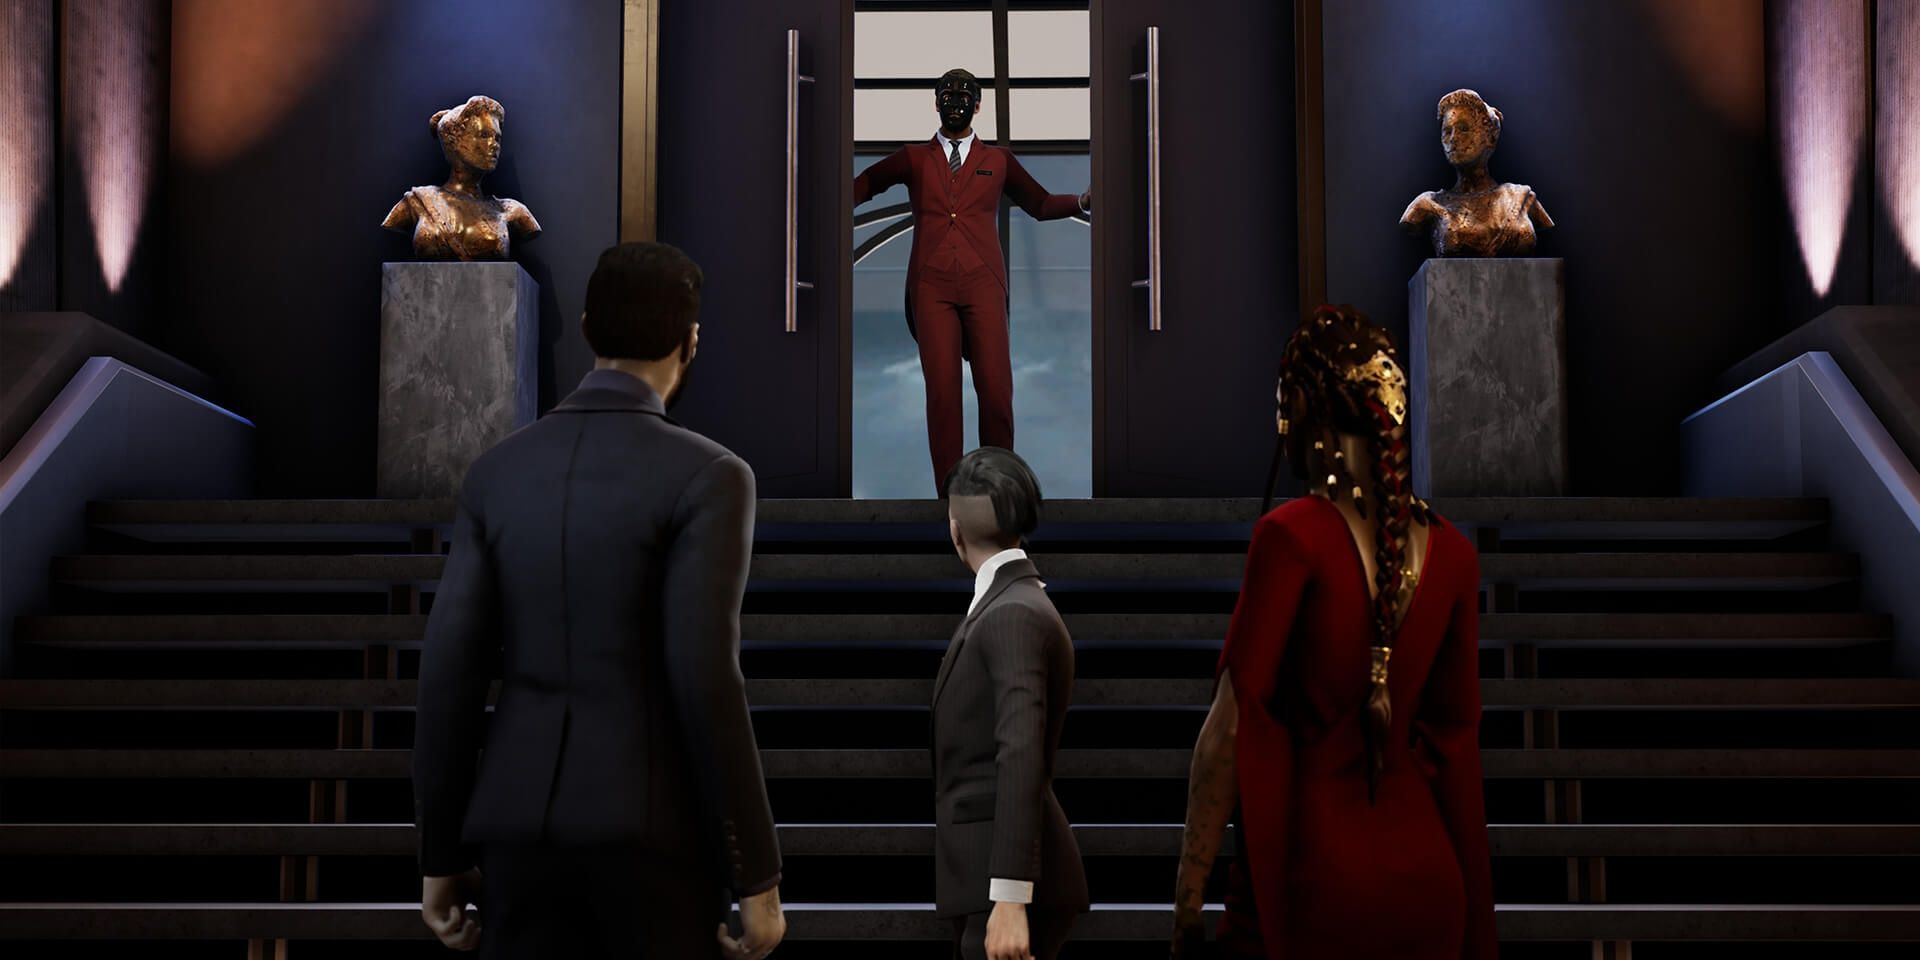 A screenshot showing the three playable characters standing in front of some steps in Vampire: The Masquerade - Swansong